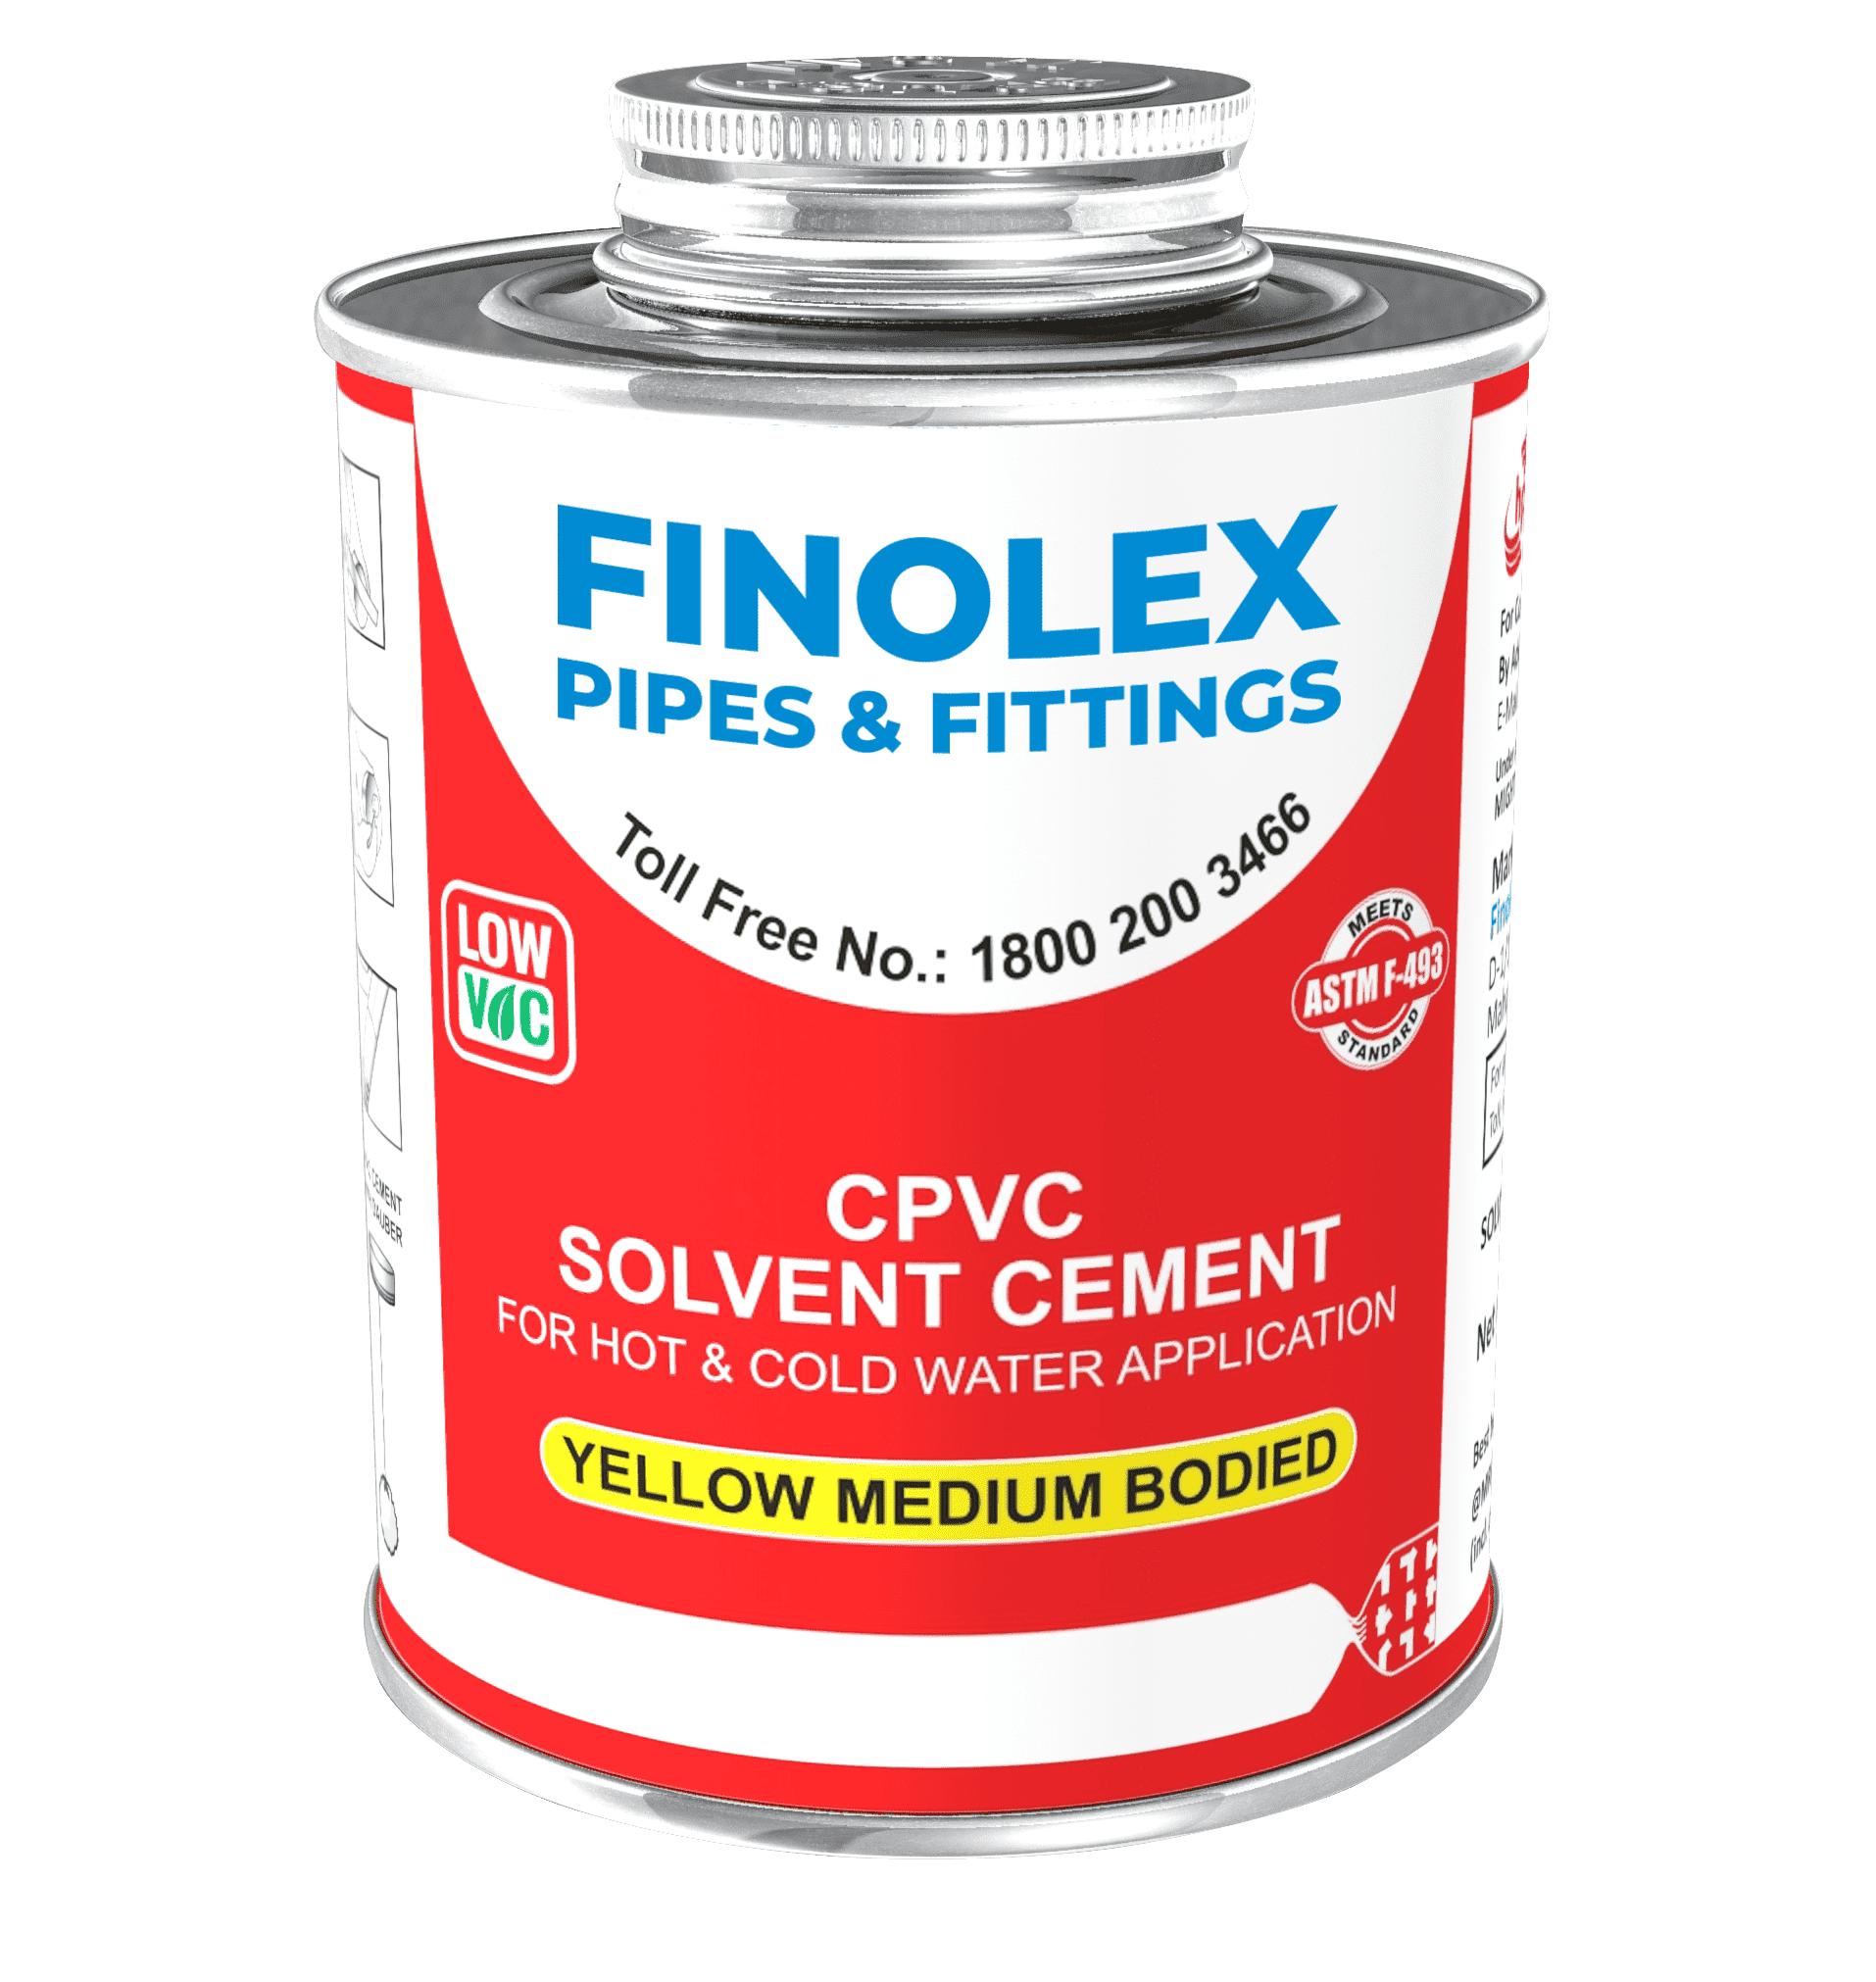 CPVC solvent cement - yellow medium bodied